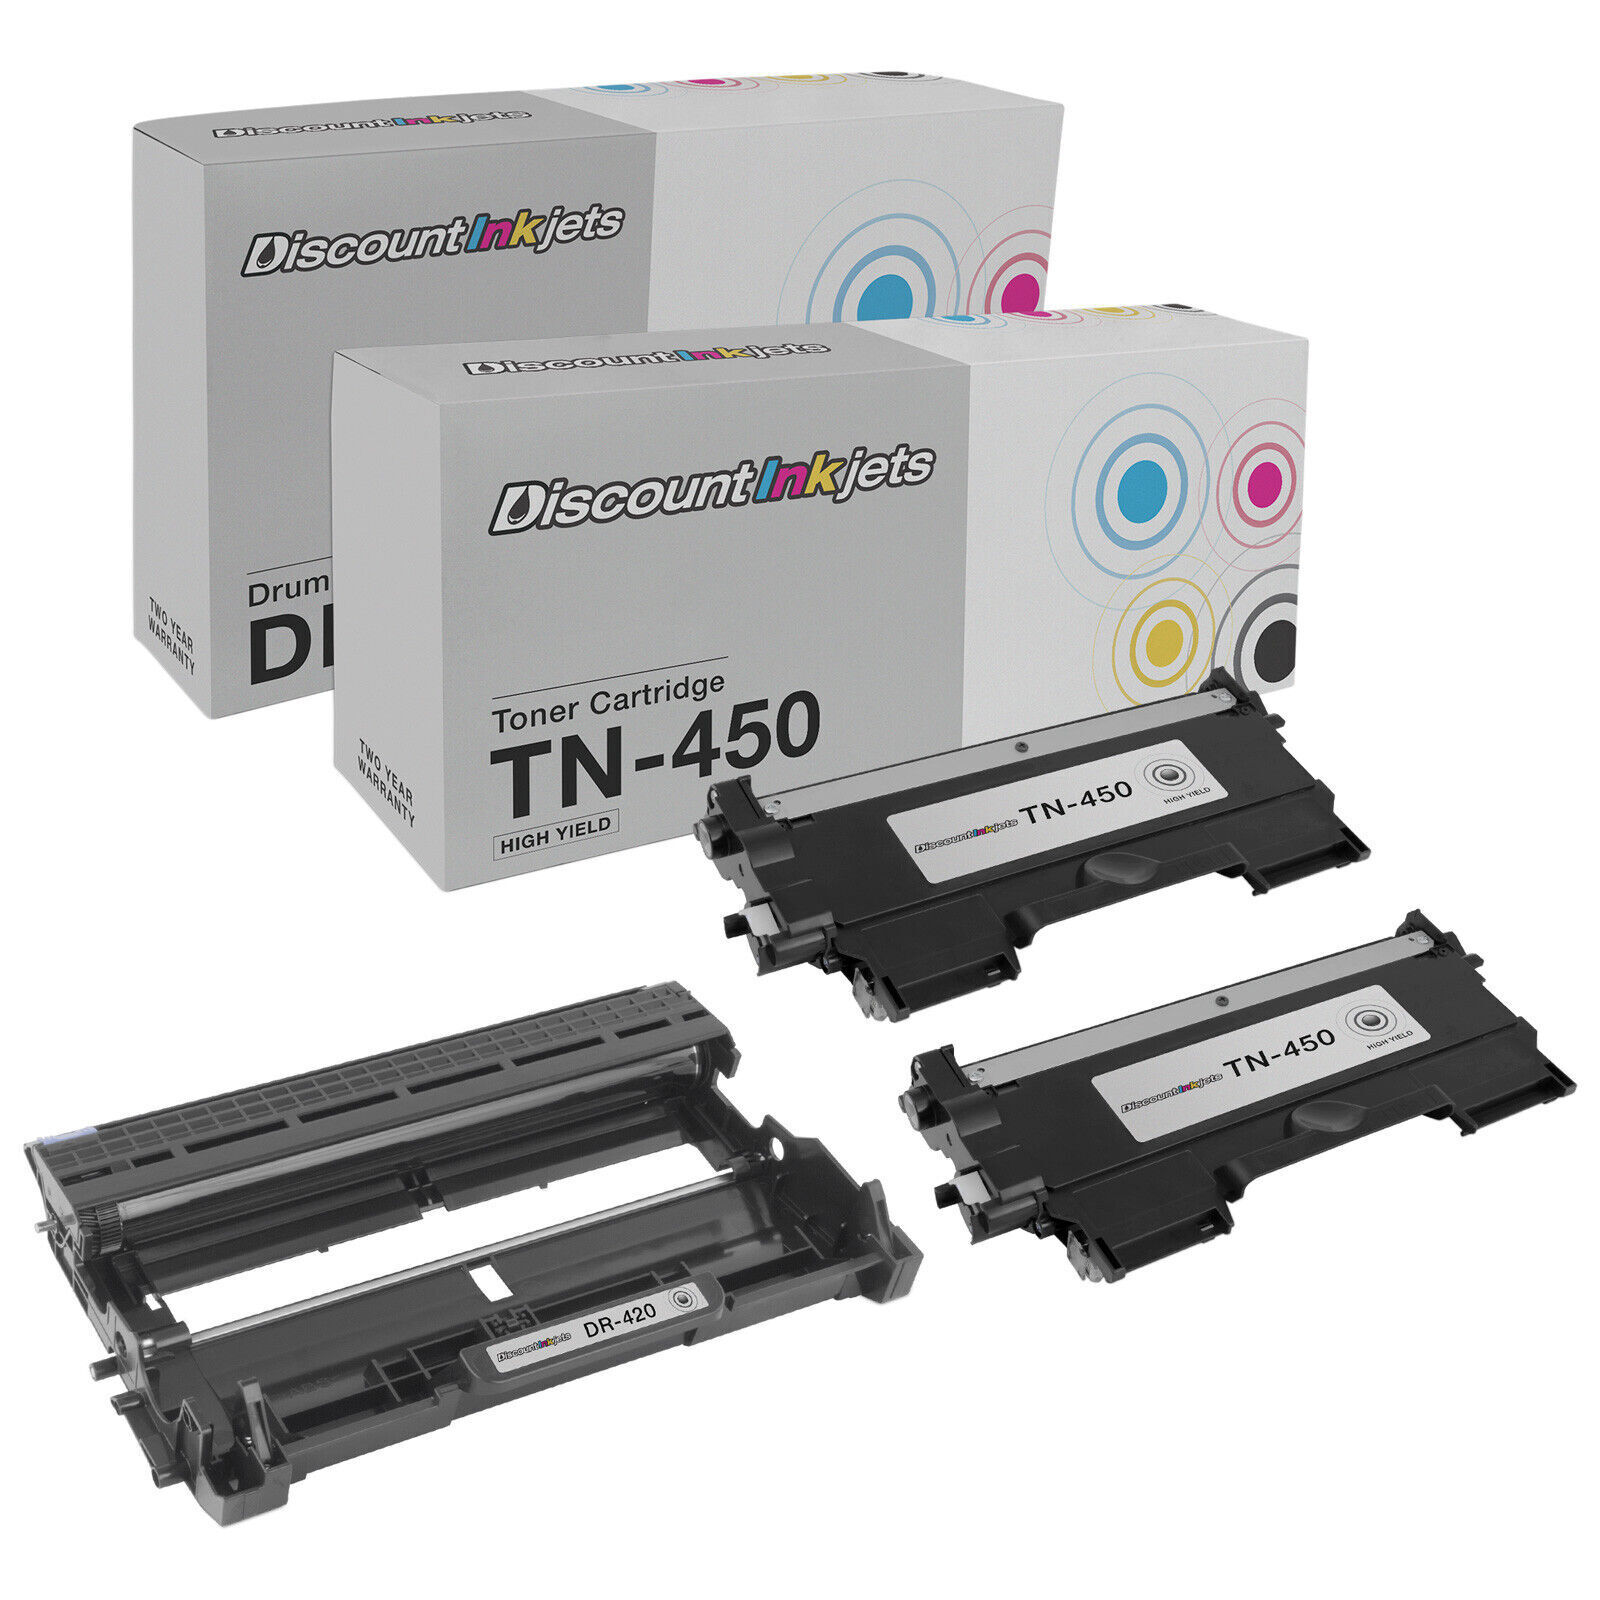 3PK TN450 Toner DR420 Drum for Brother Intellifax 2840 2940 MFC-7460DN MFC-7860D